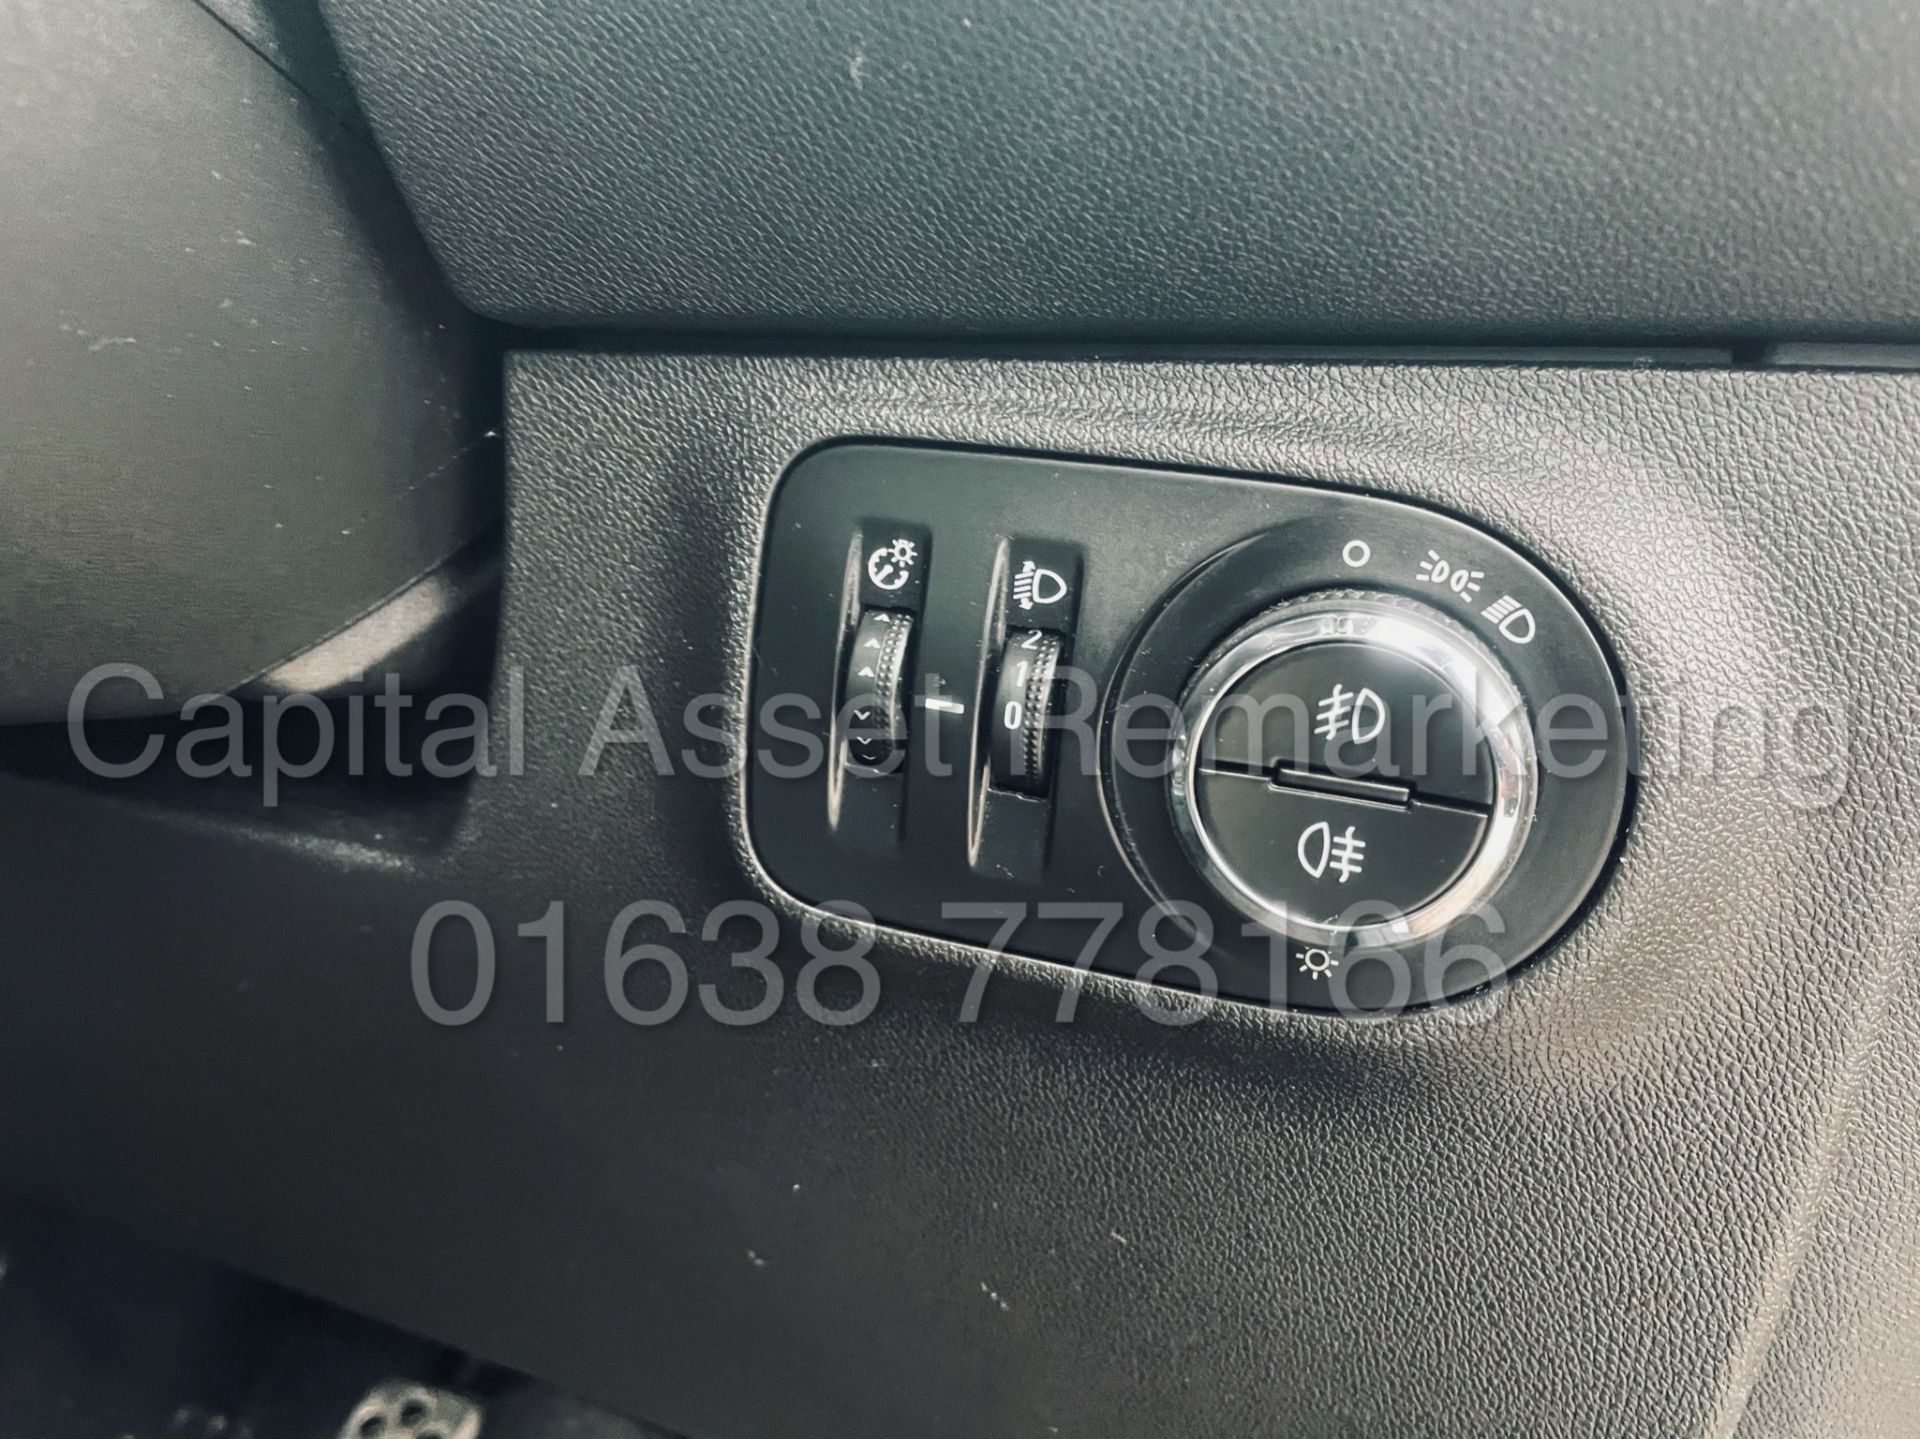 ON SALE VAUXHALL CORSA *LIMITED EDITION* 5 DOOR (2017 MODEL) '1.4 PETROL - ECOFLEX' *AIR CON* - Image 34 of 44